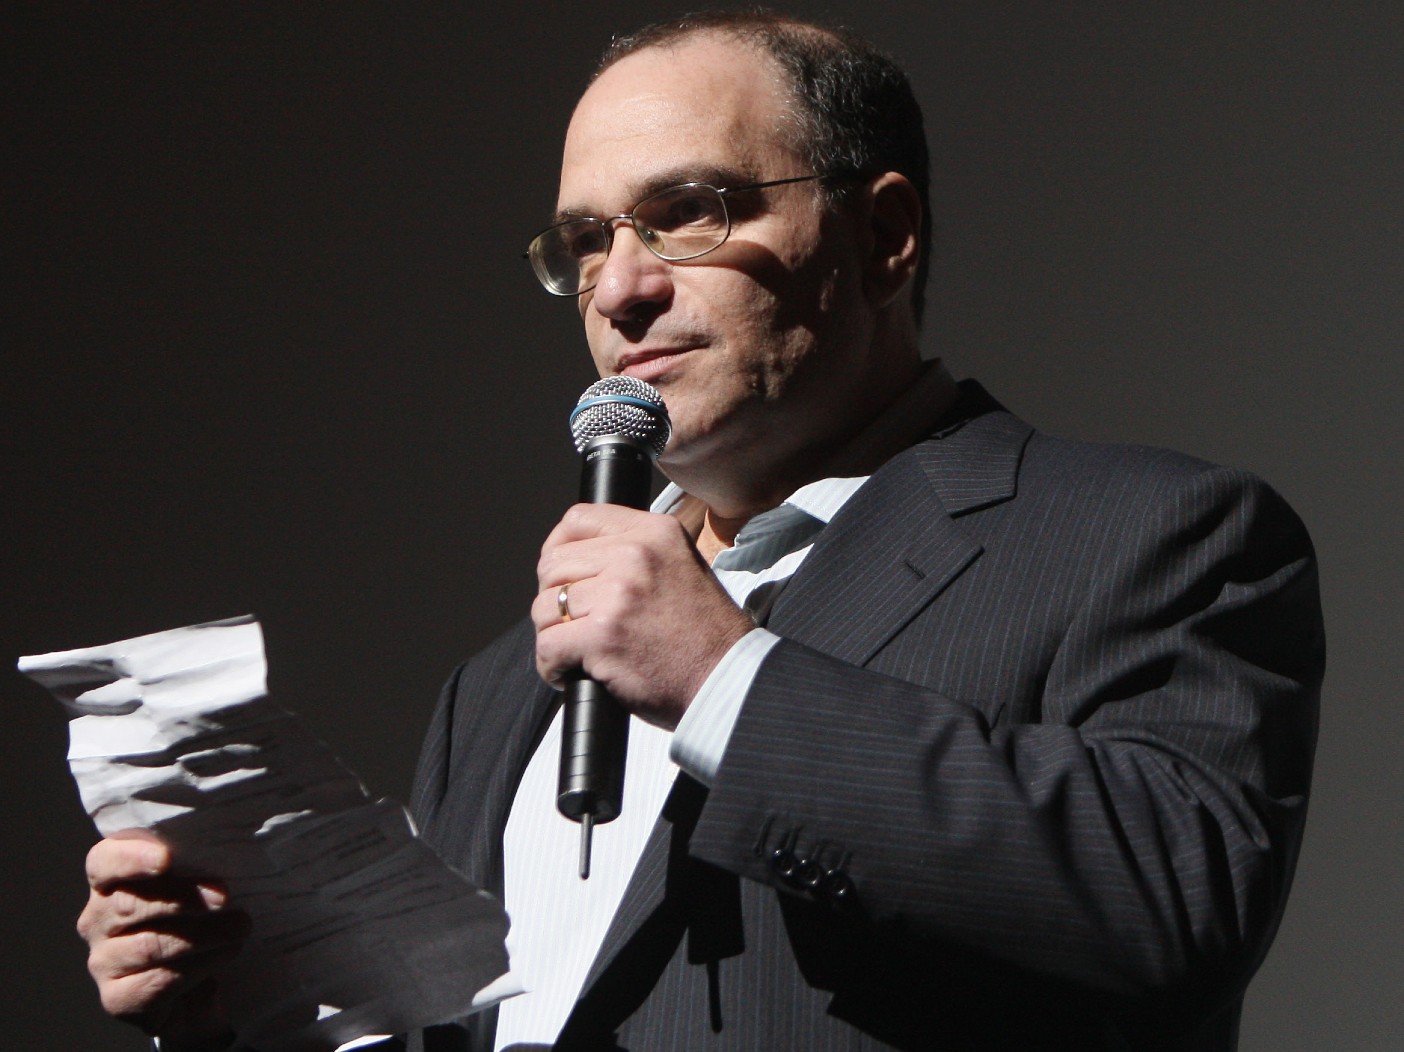 What Is Bob Weinstein Up To In 2022? Is He Still Making Films?